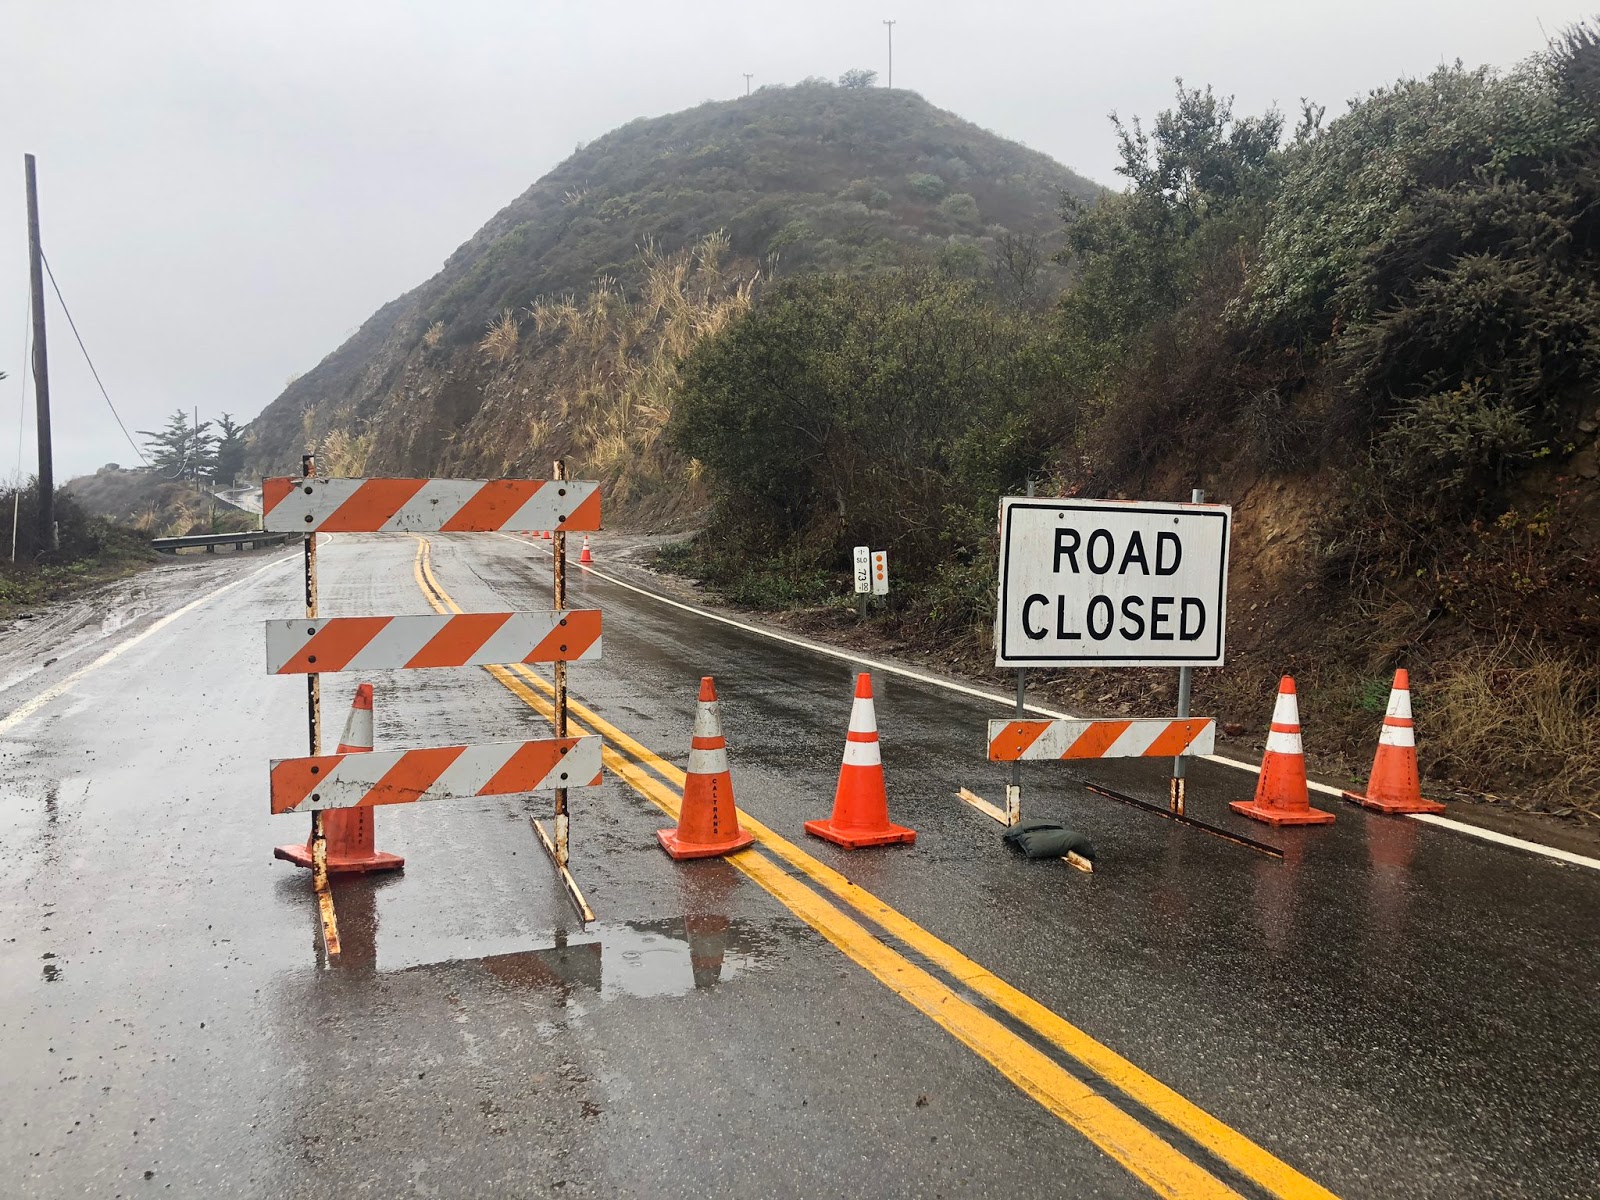 John Chiv Part of Hwy 1 in Central California closed due to adverse